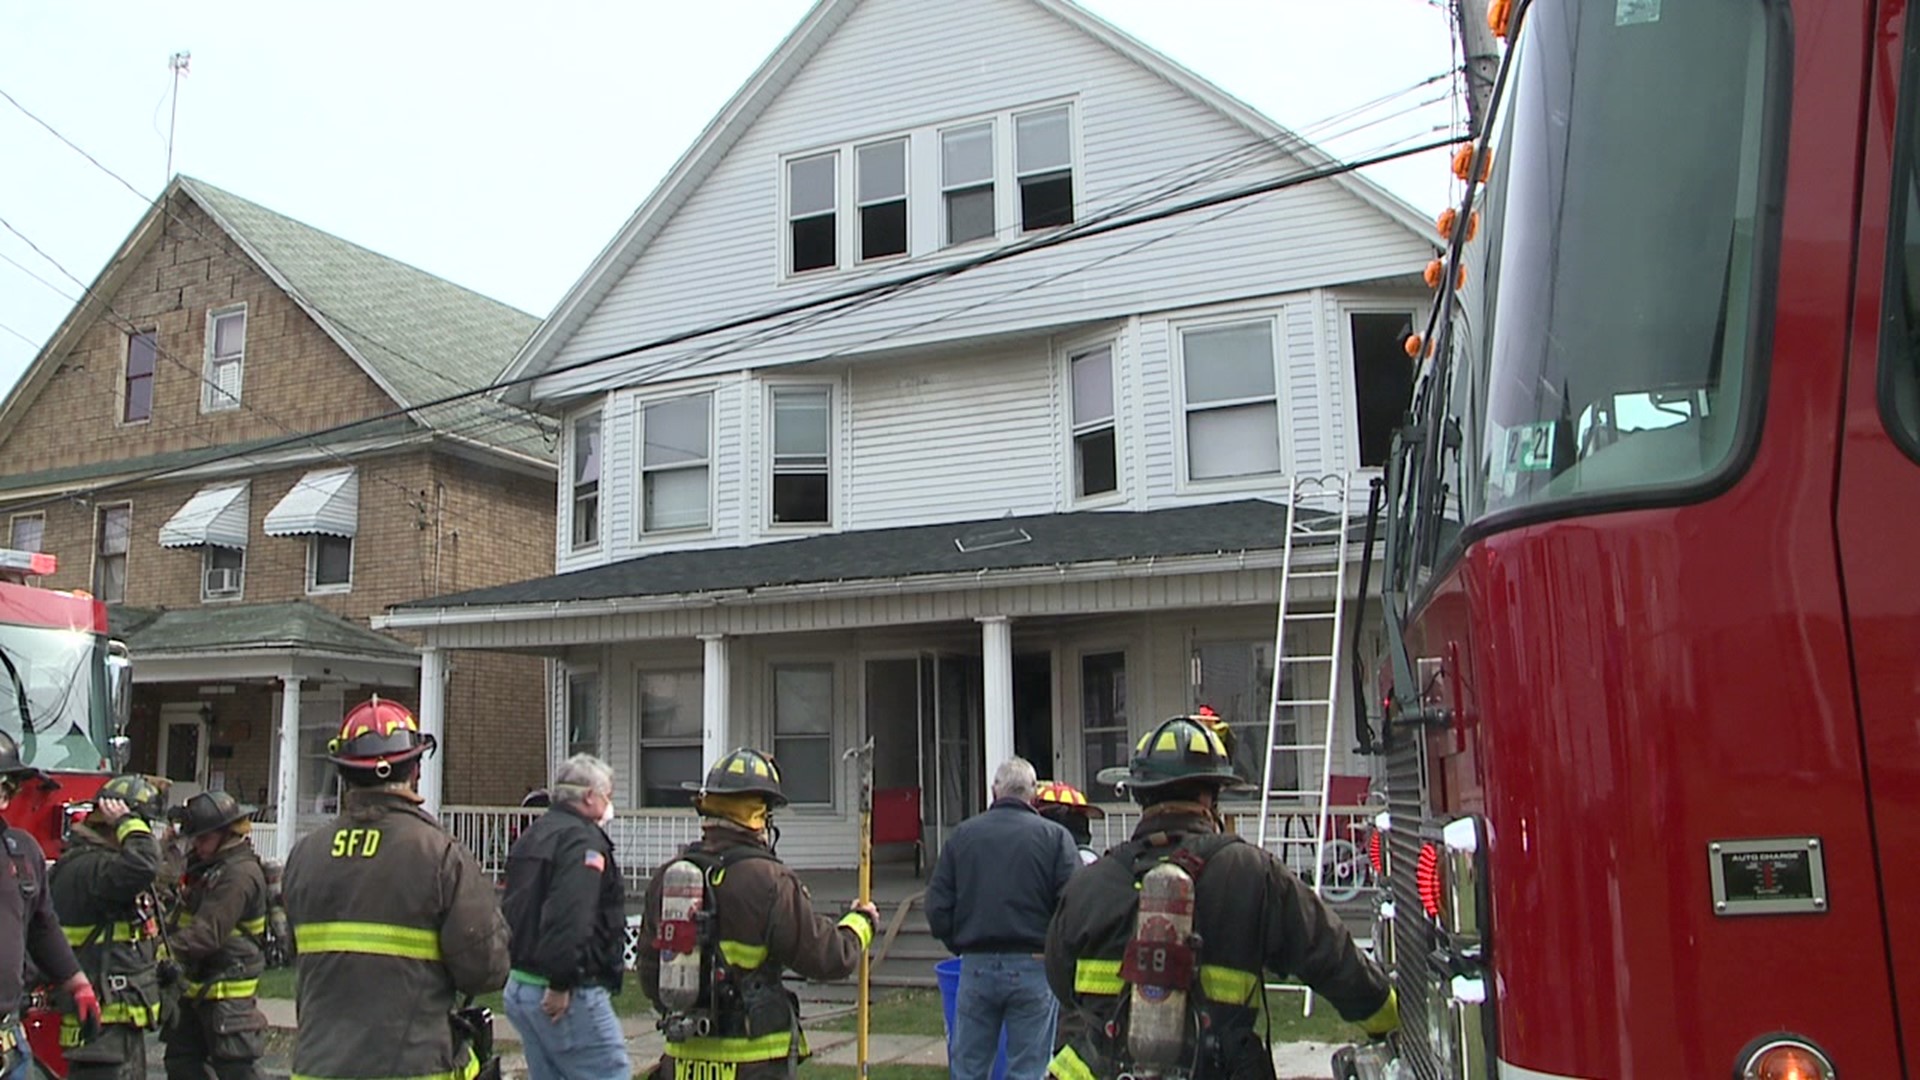 The fire at the double block home was put out quickly but fire crews said it could have been much worse without help from the city's police department.